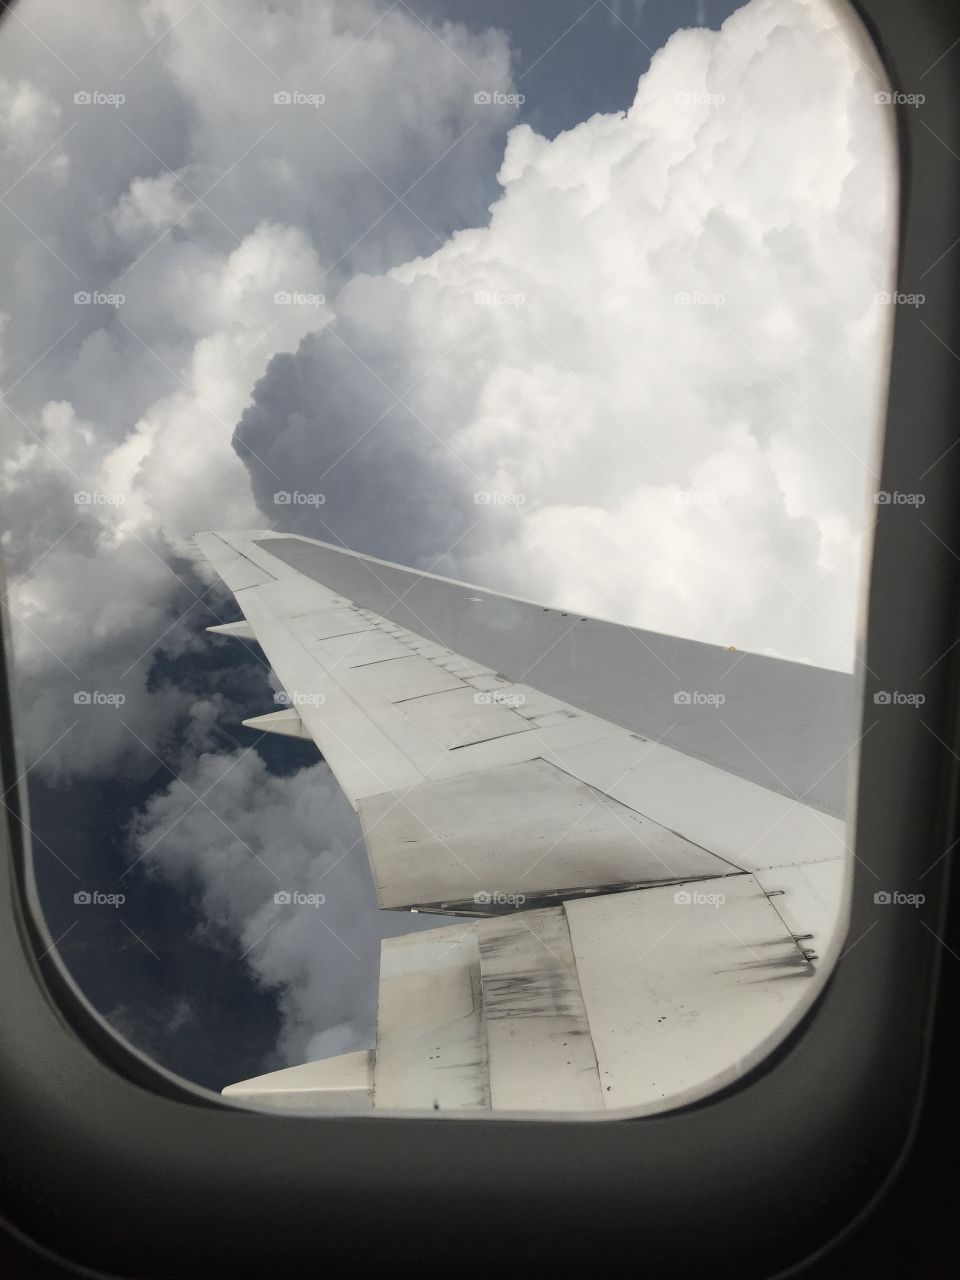 Flying outside a storm